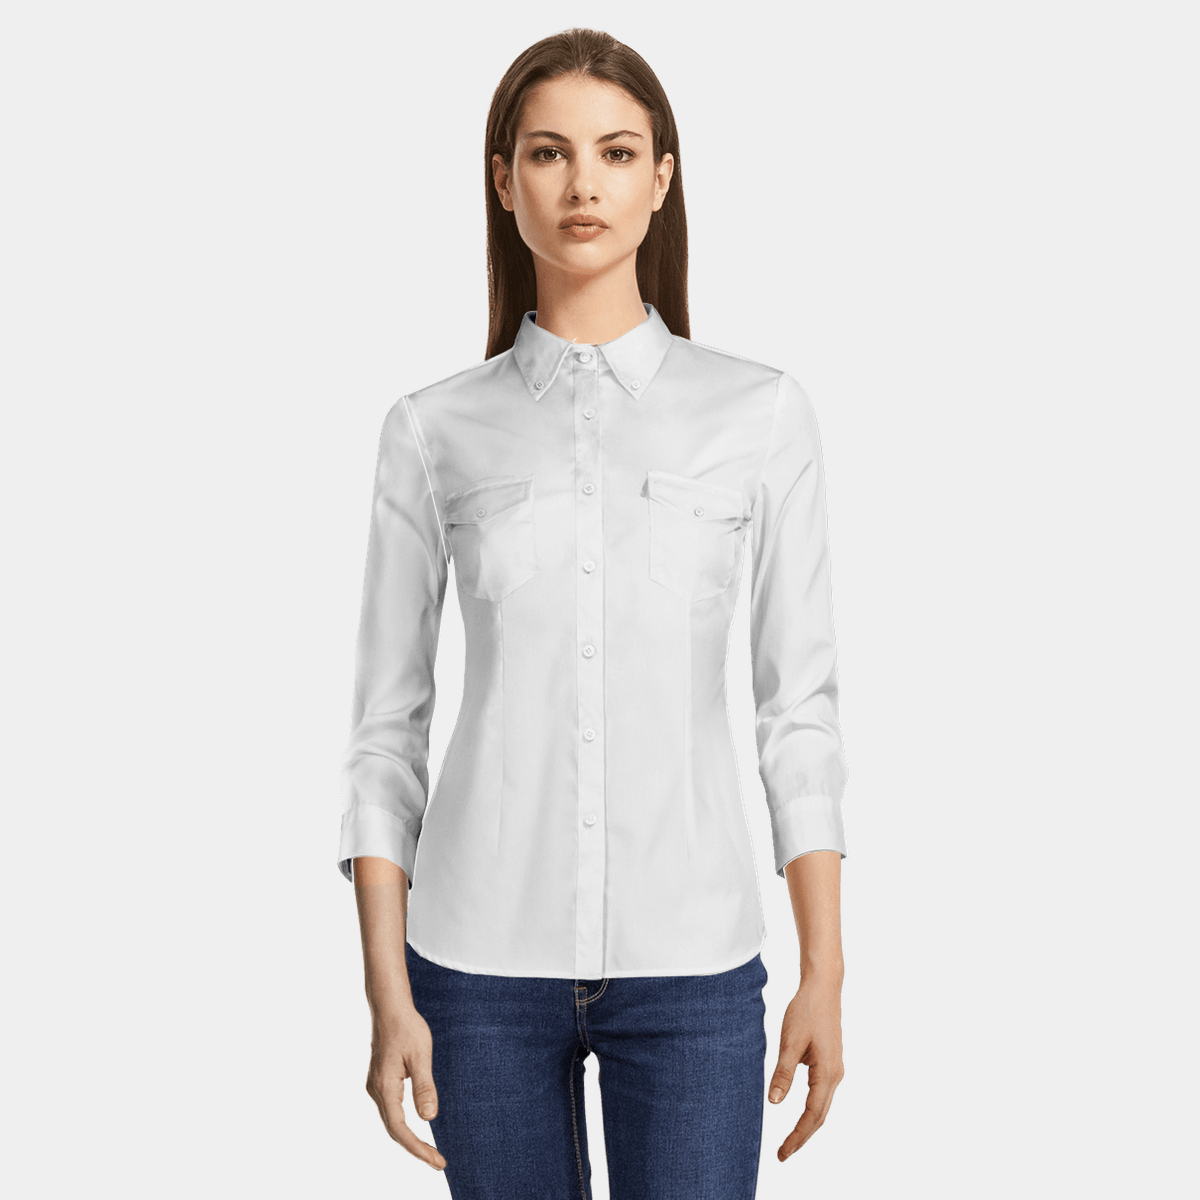 White 3/4 sleeve button down poplin cotton Shirt with pockets